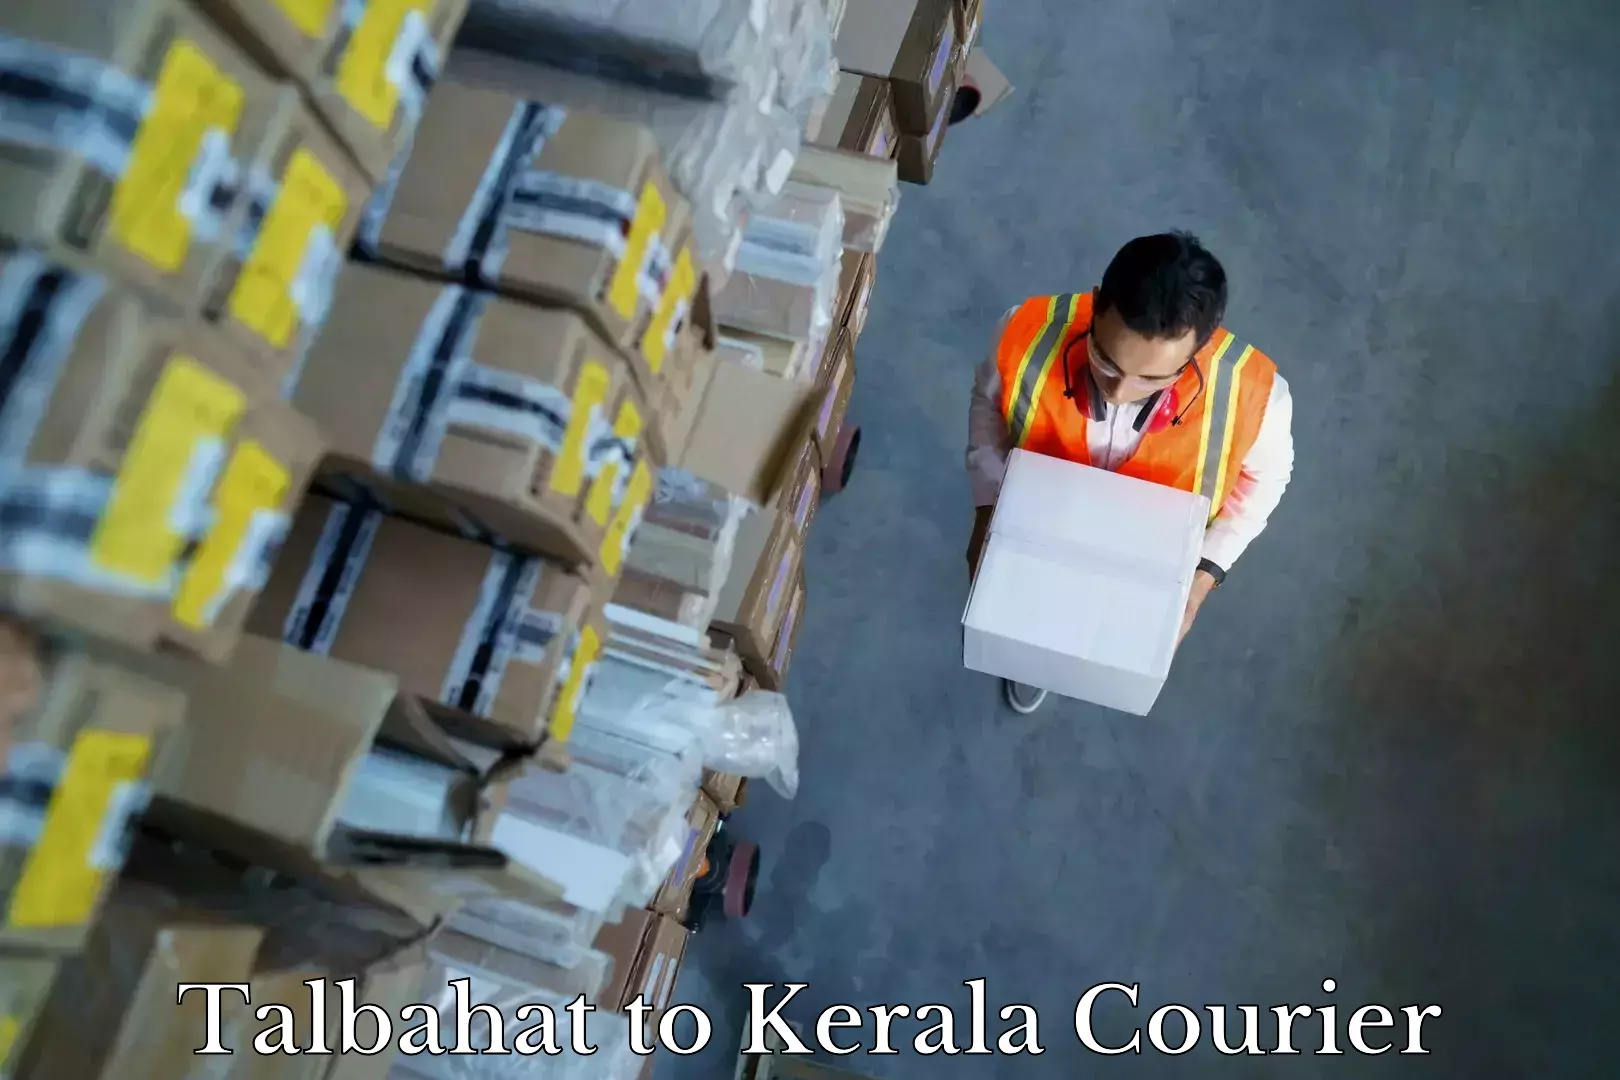 Home moving specialists Talbahat to Kerala